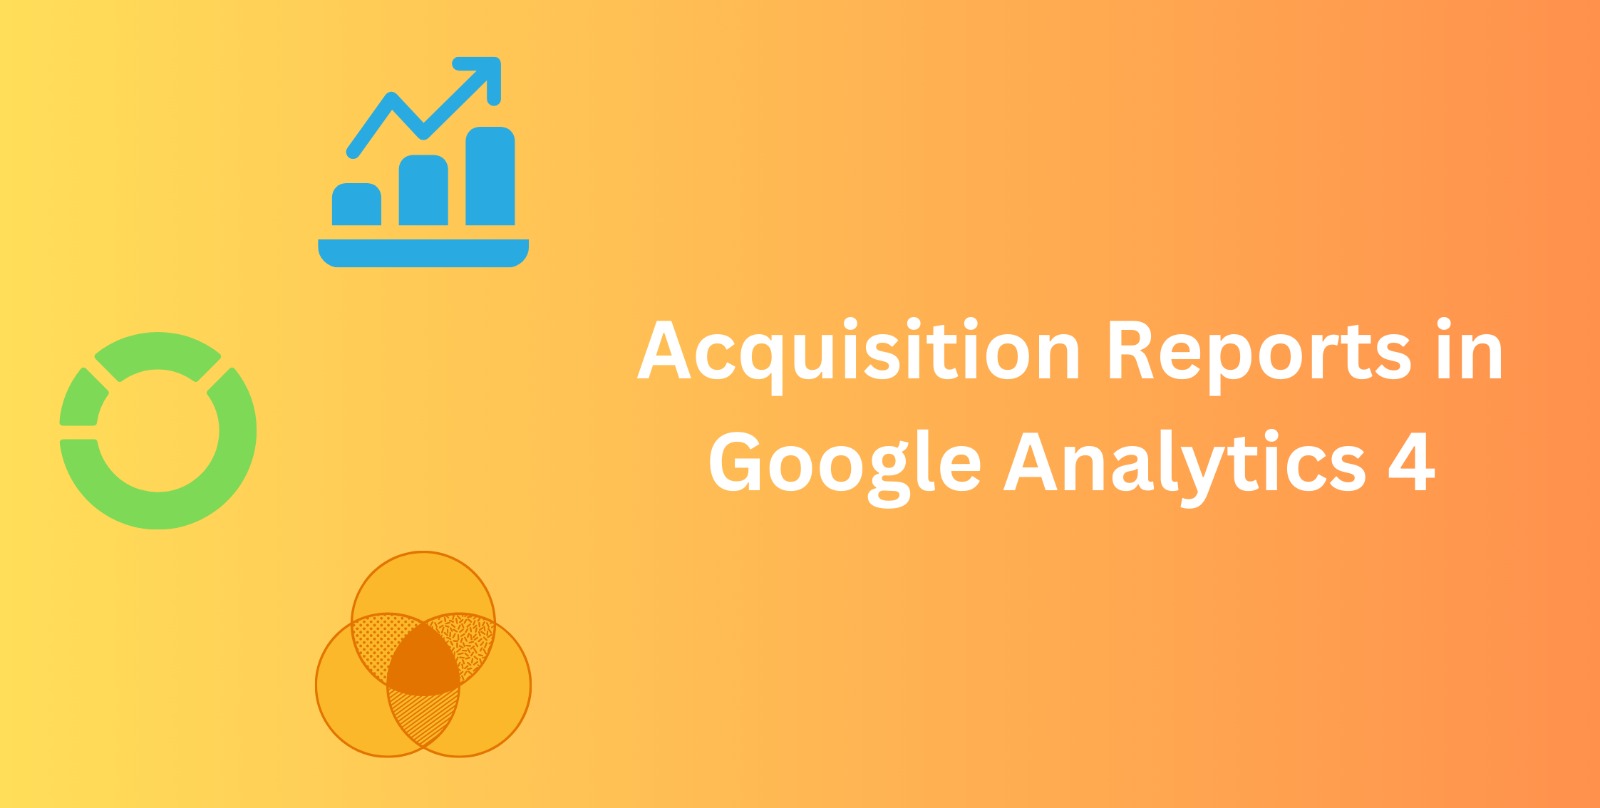 Understanding The Acquisition Reports In Google Analytics 4